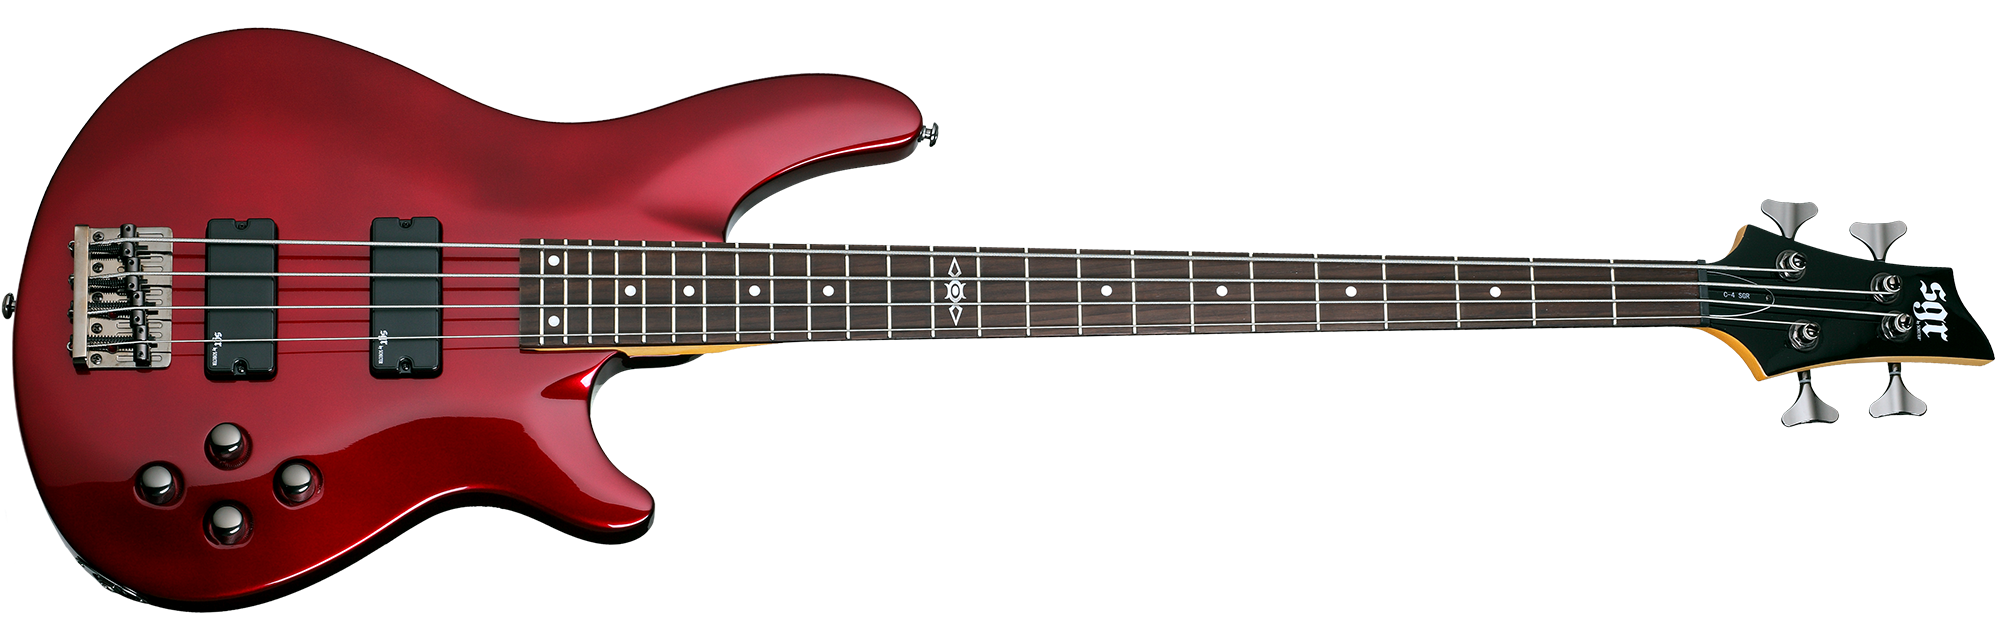 Schecter C-4-SGR-RED Metallic Red 4 String Bass with SGR Pickups and Gigbag 3817-SHC